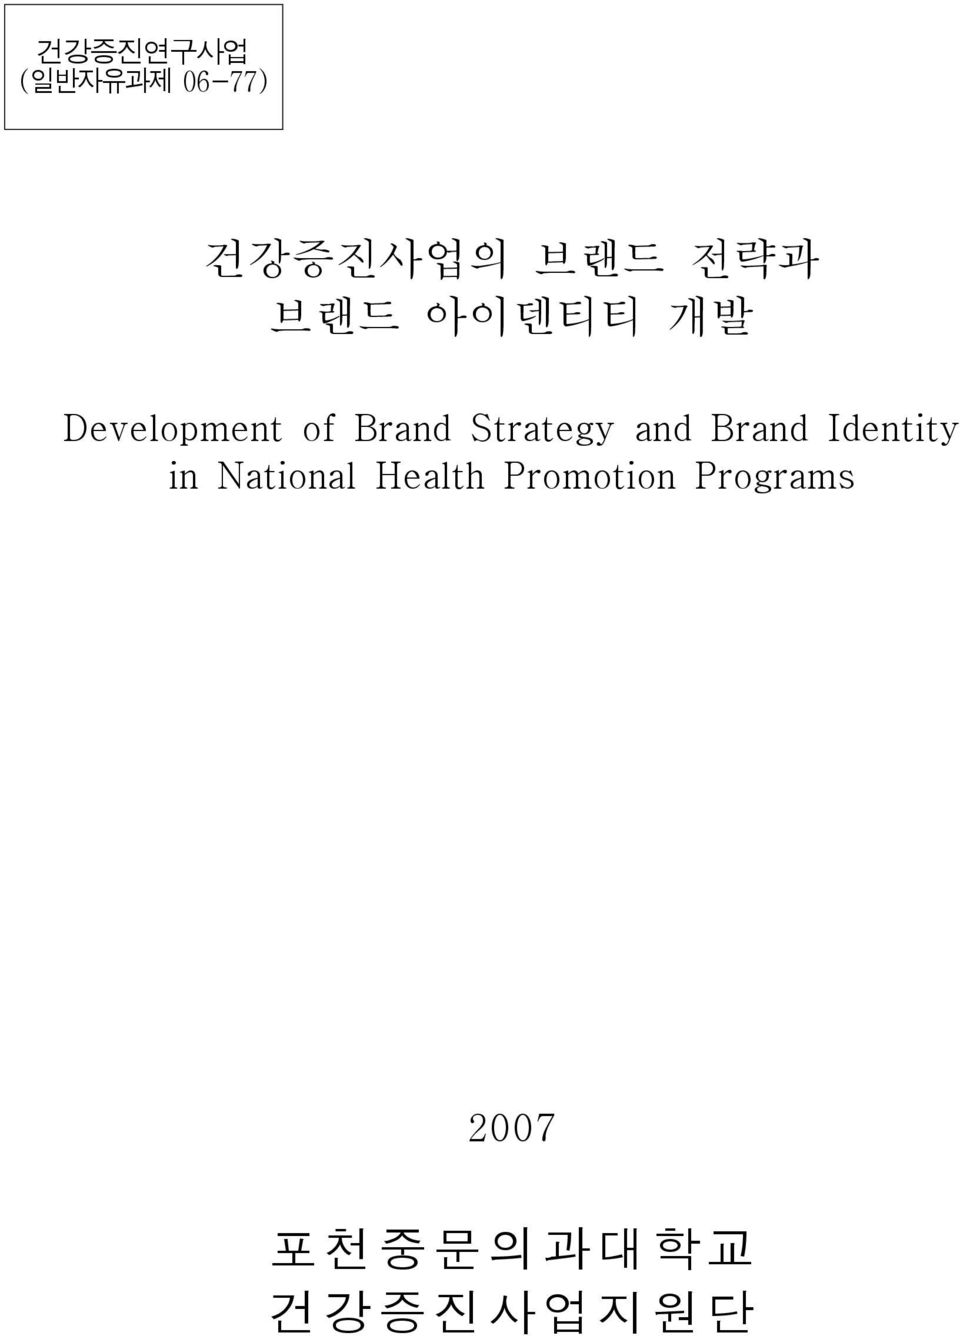 Strategy and Brand Identity in National